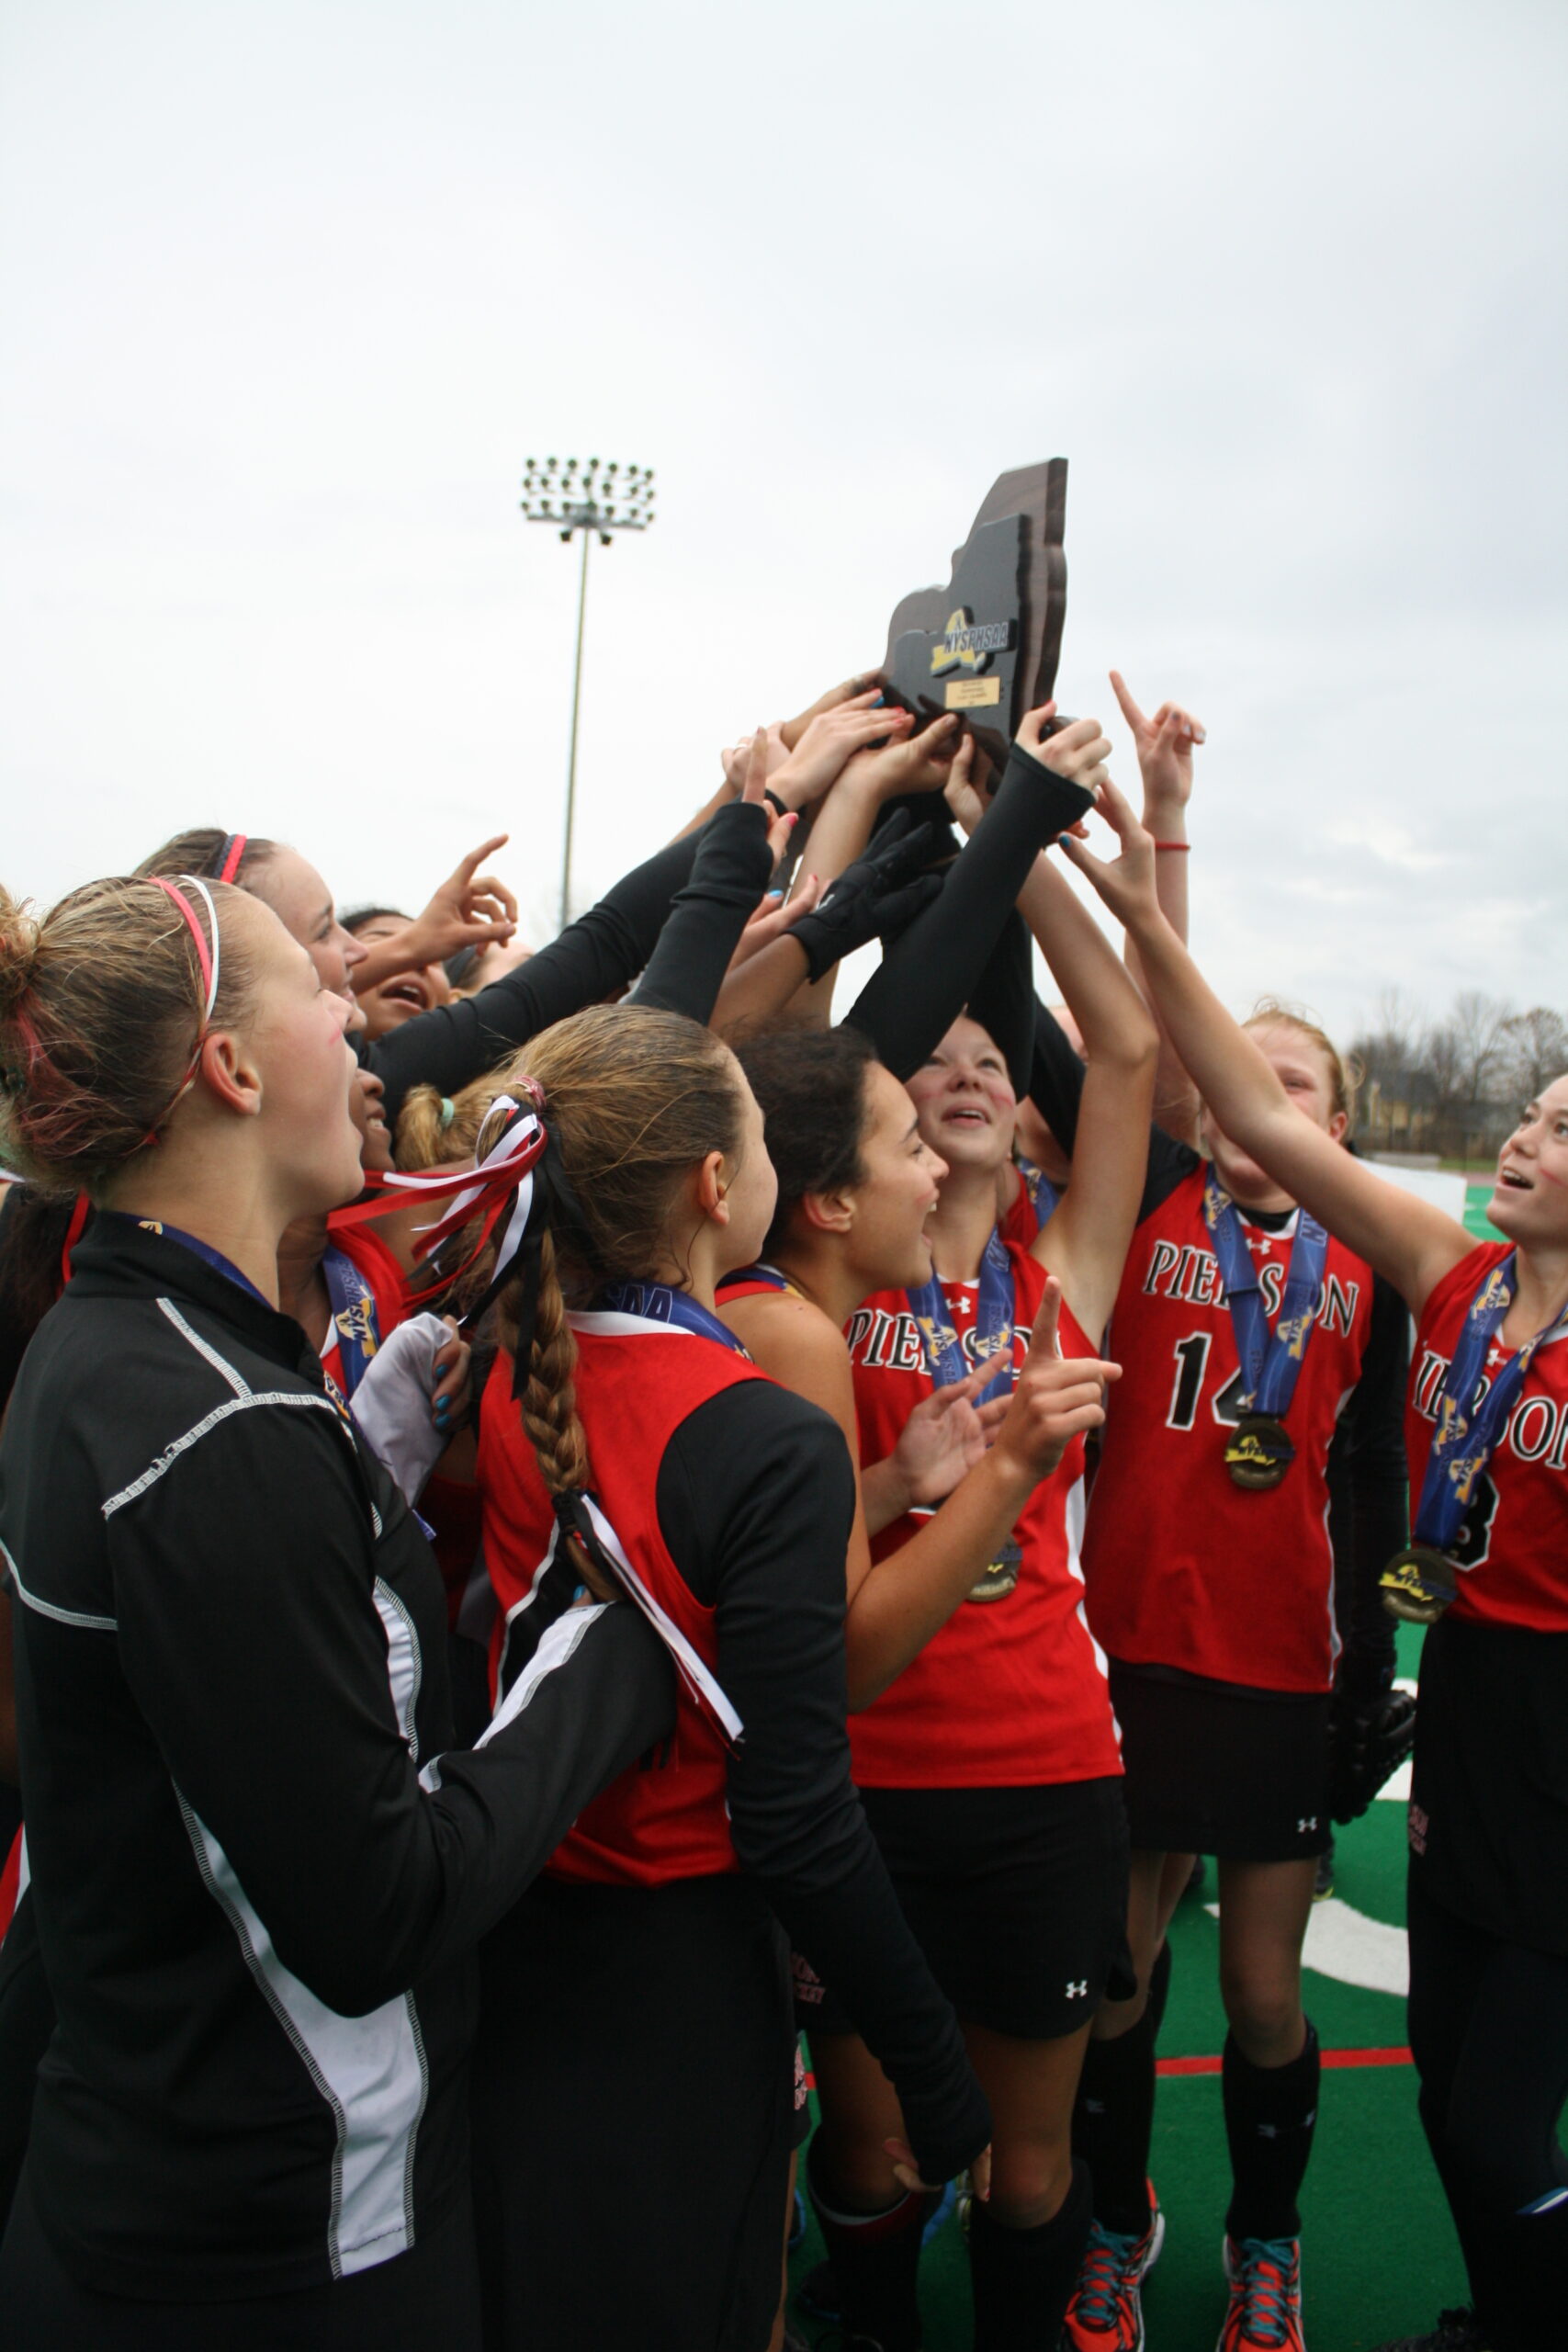 The Pierson field hockey team won the state championship in 2013, its first and only state title, after many trips to the state final four over the years. EXPRESS ARCHIVES